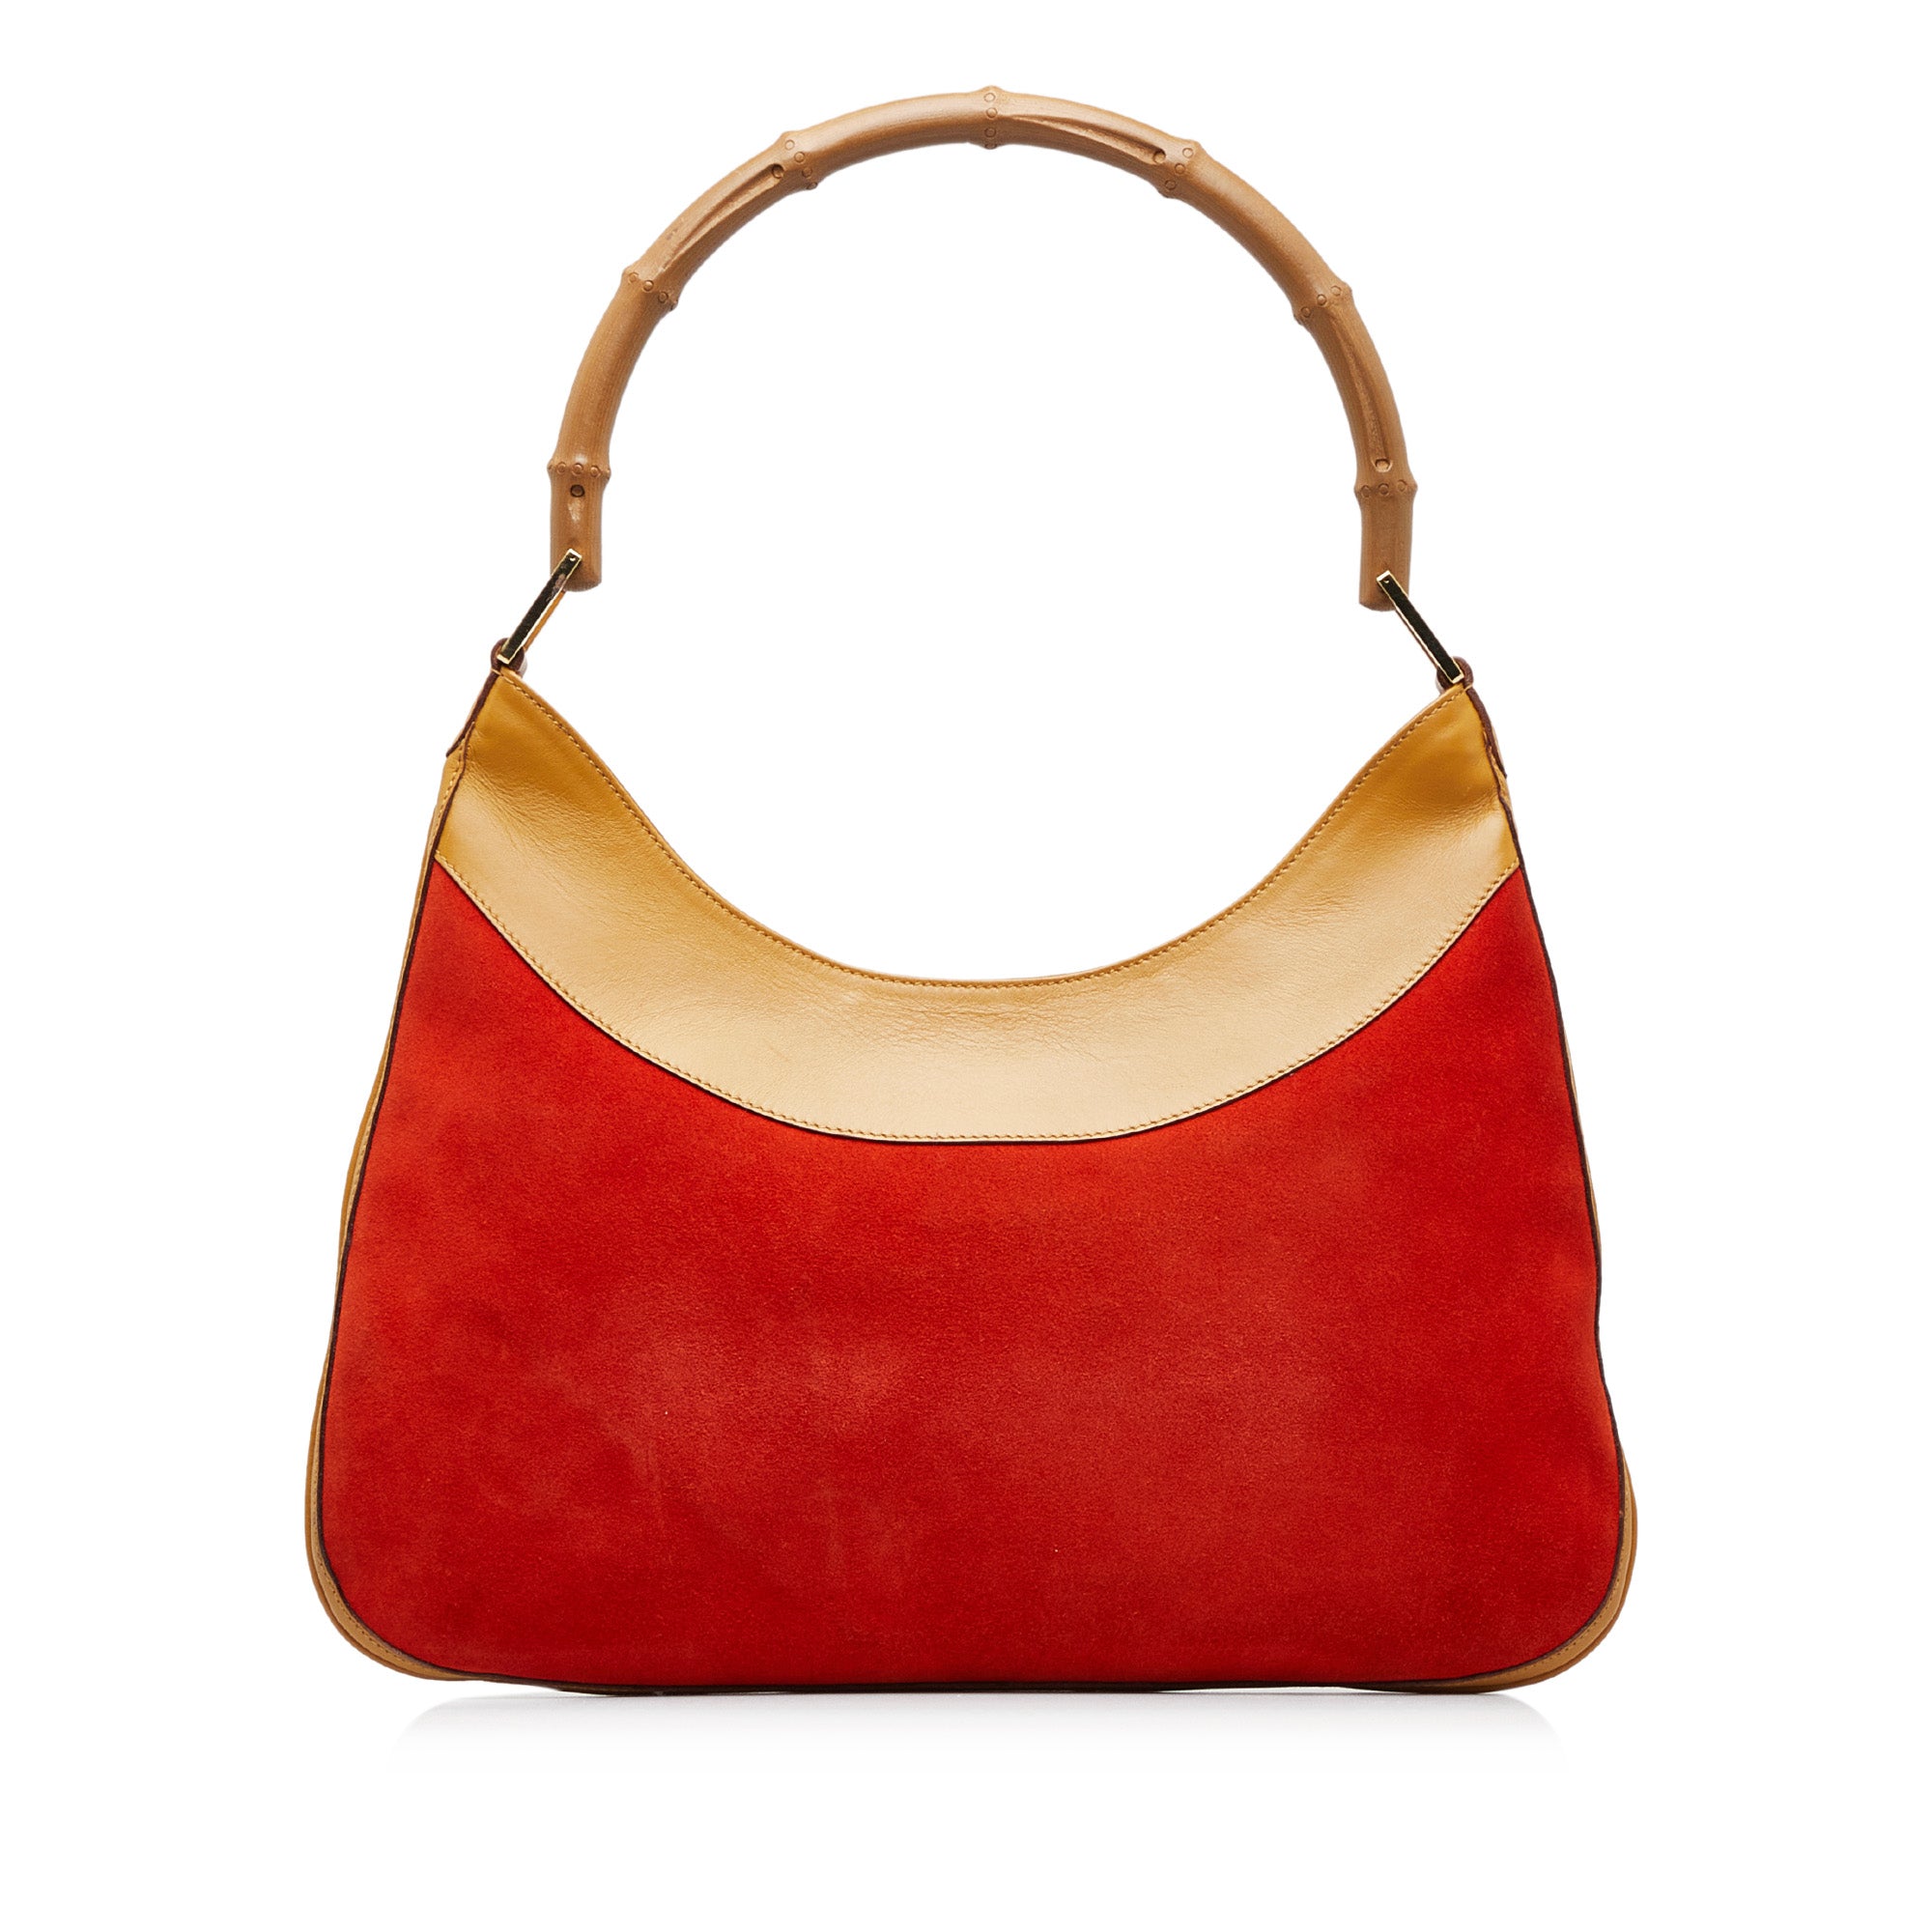 Red Gucci Bamboo Suede Shoulder Bag